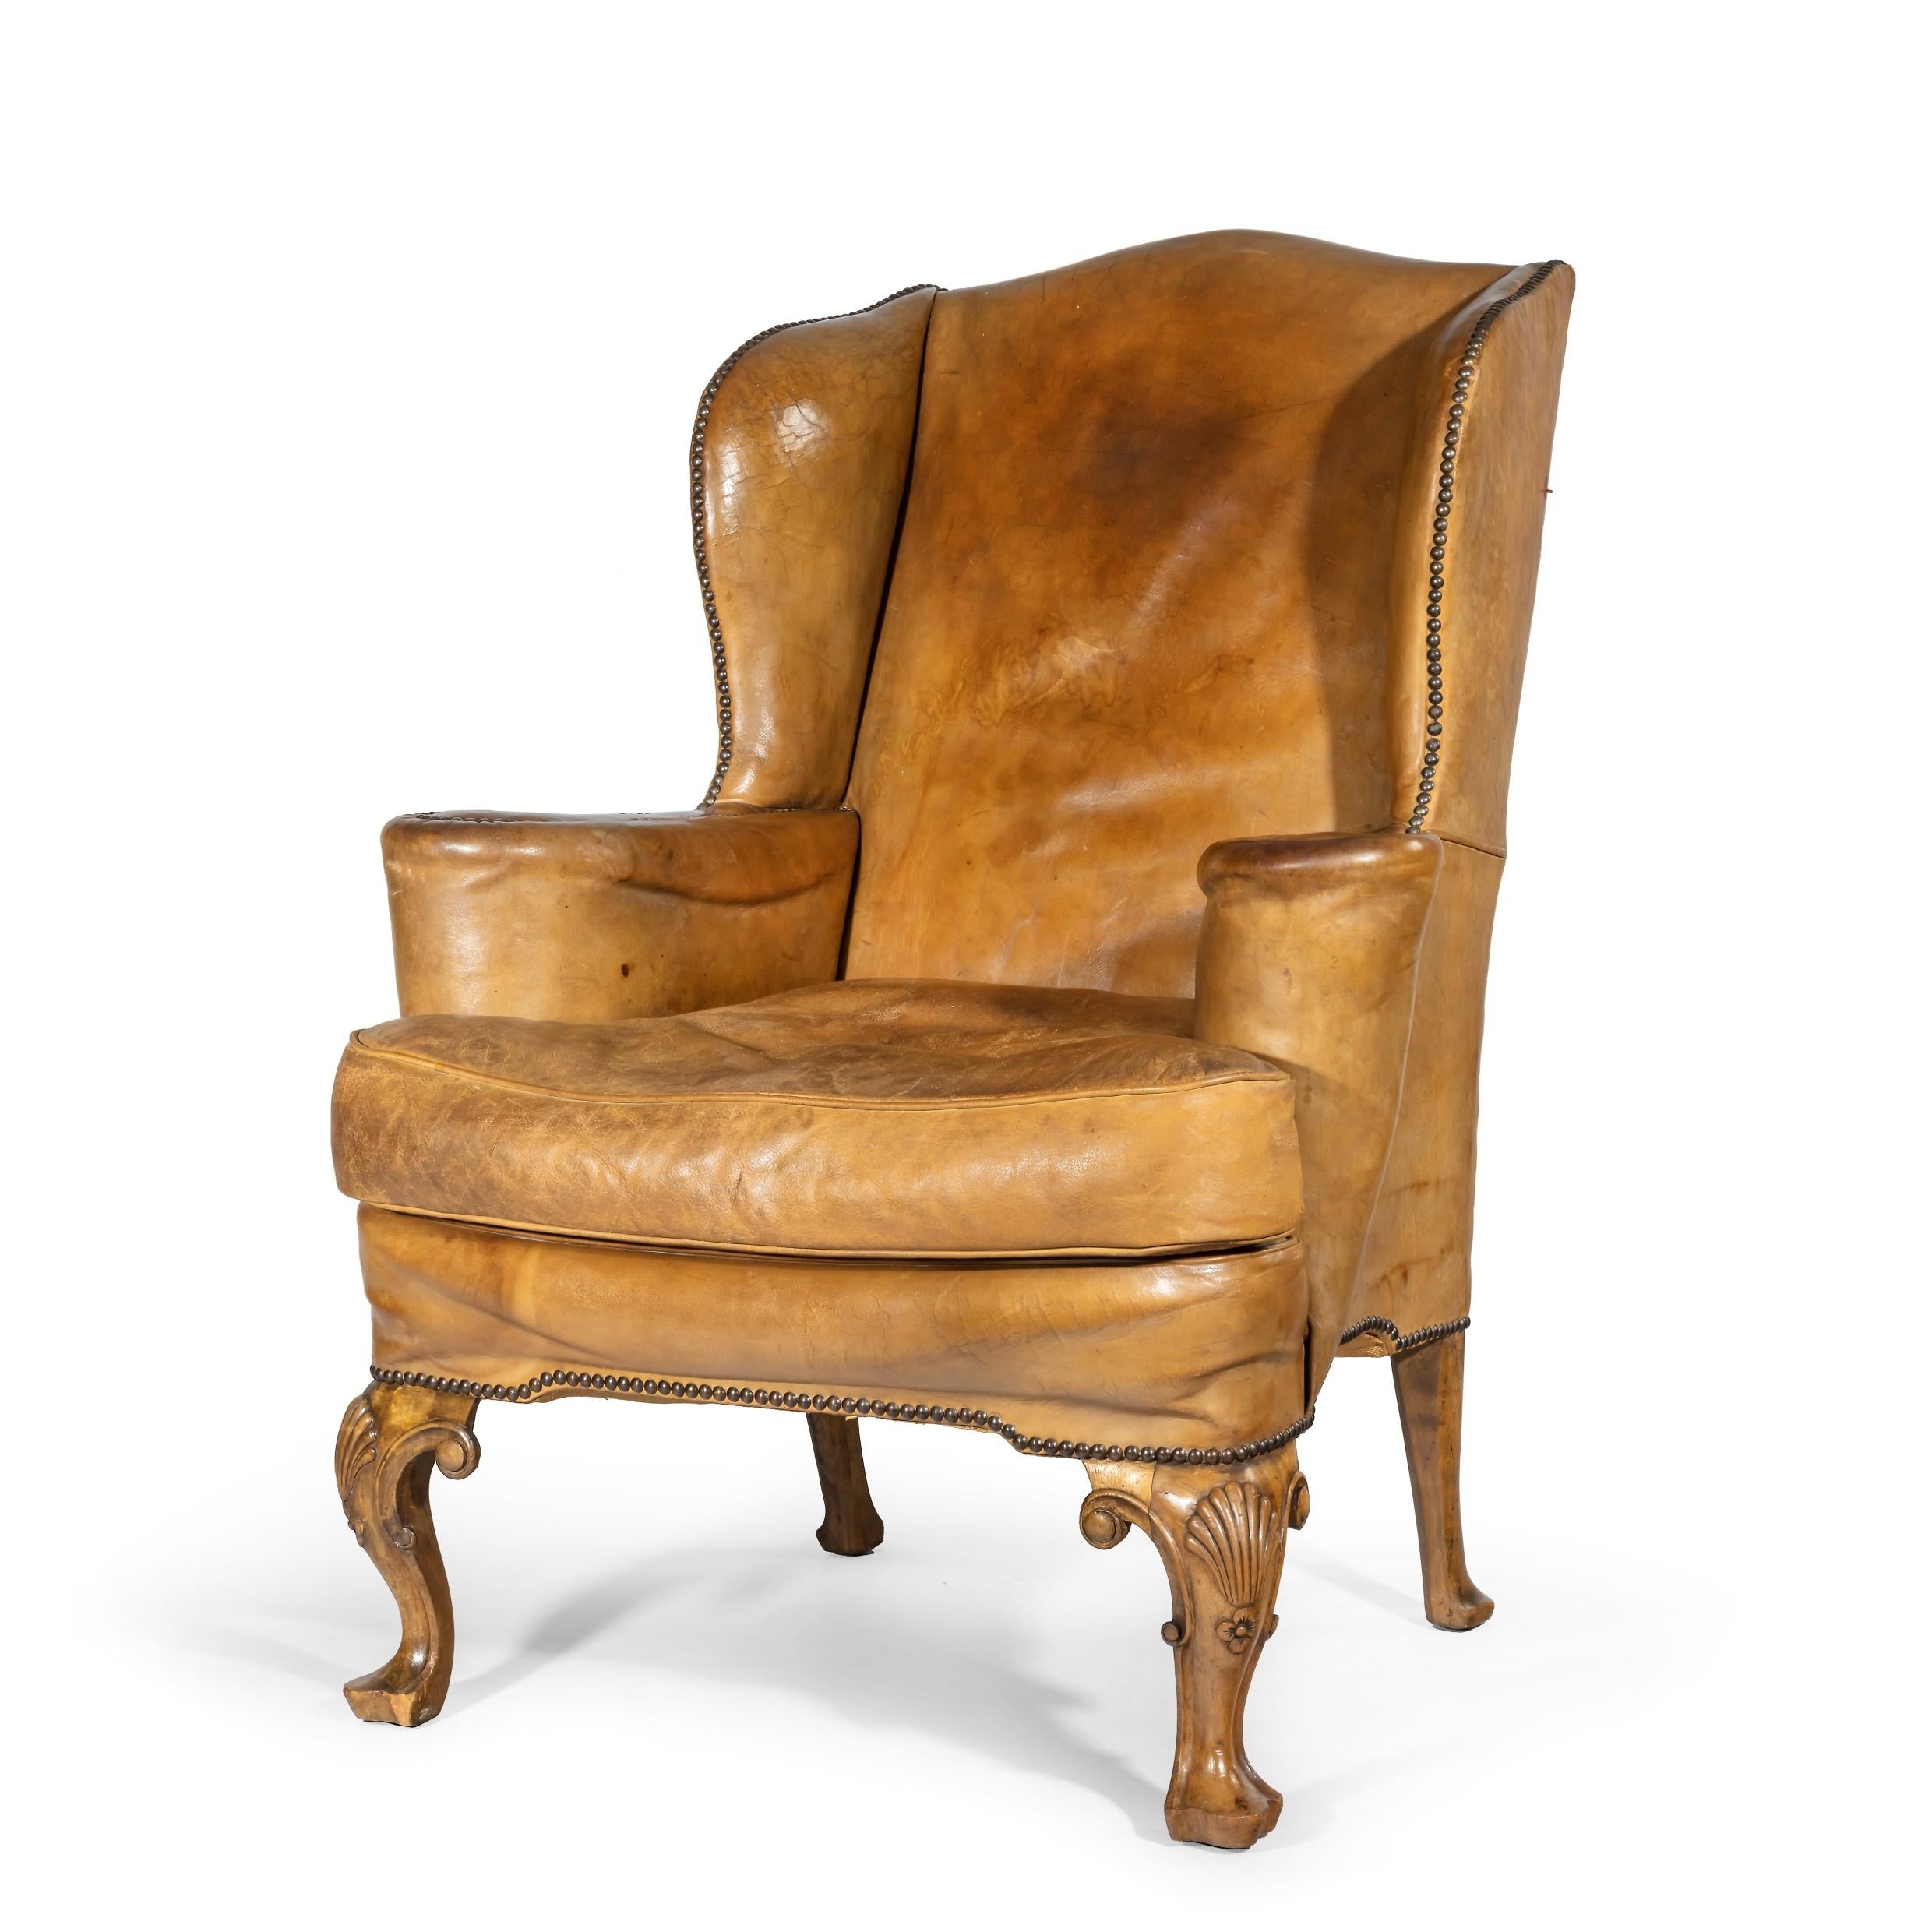 A pair of walnut wing armchairs in the Queen Anne style, the front legs carved with shells on the knees. English, circa 1920.

 